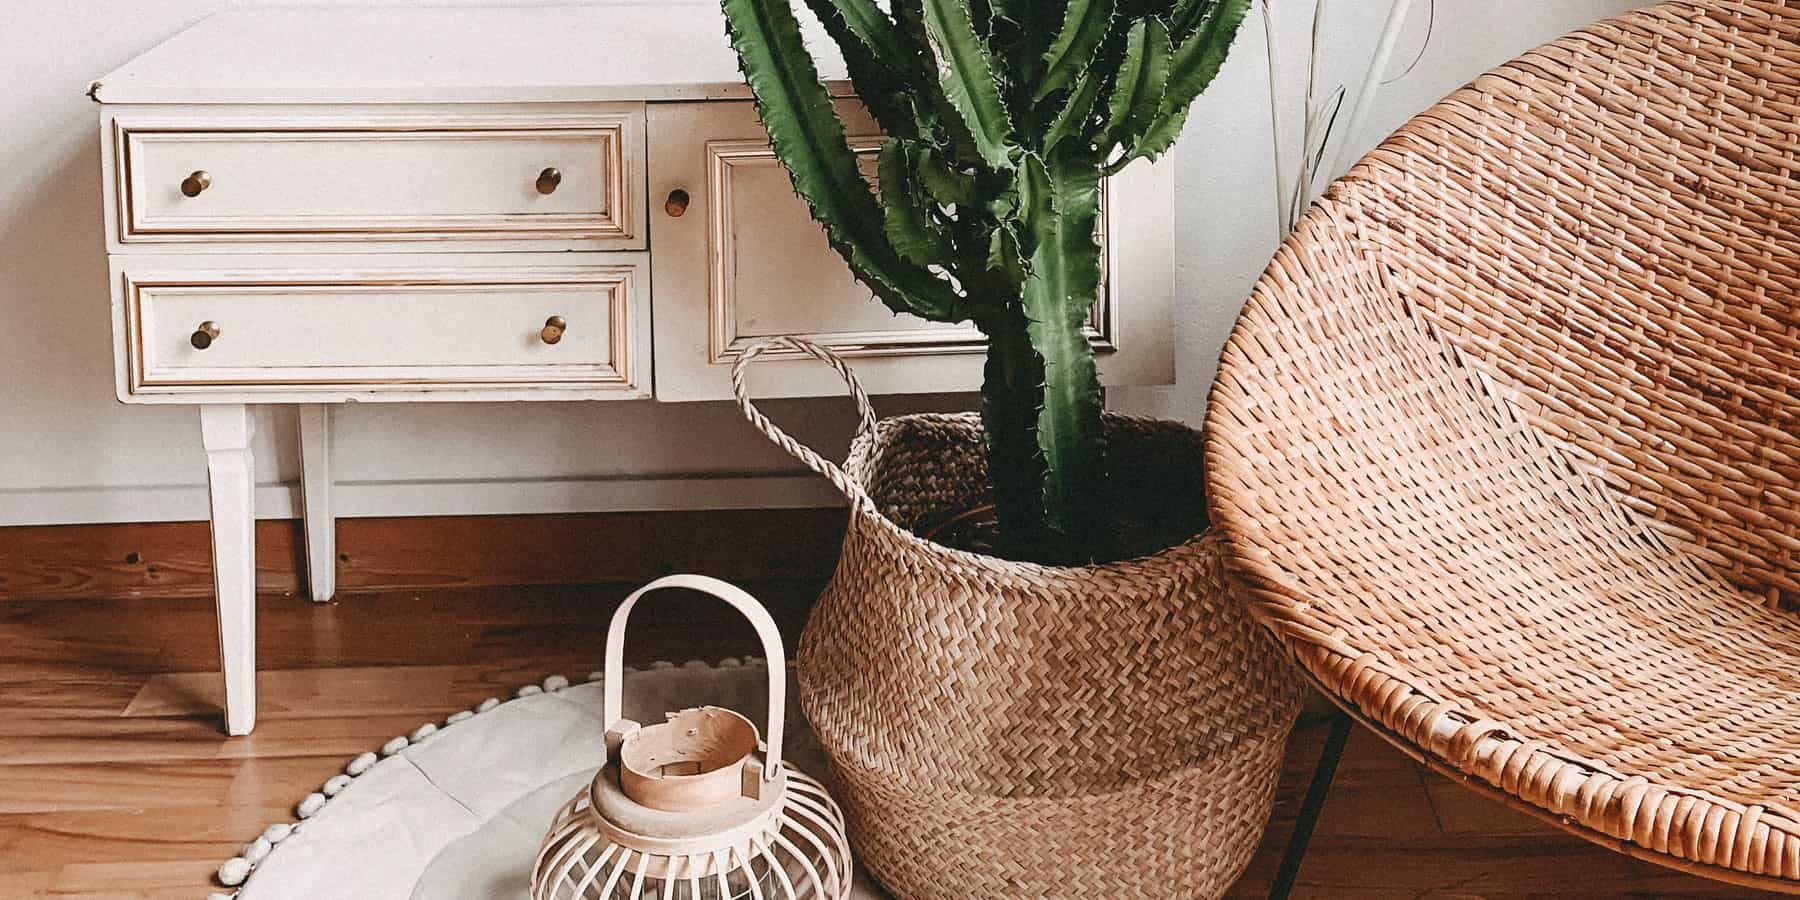 Boho Decoration room featuring plants and rattan furniture and accessories.